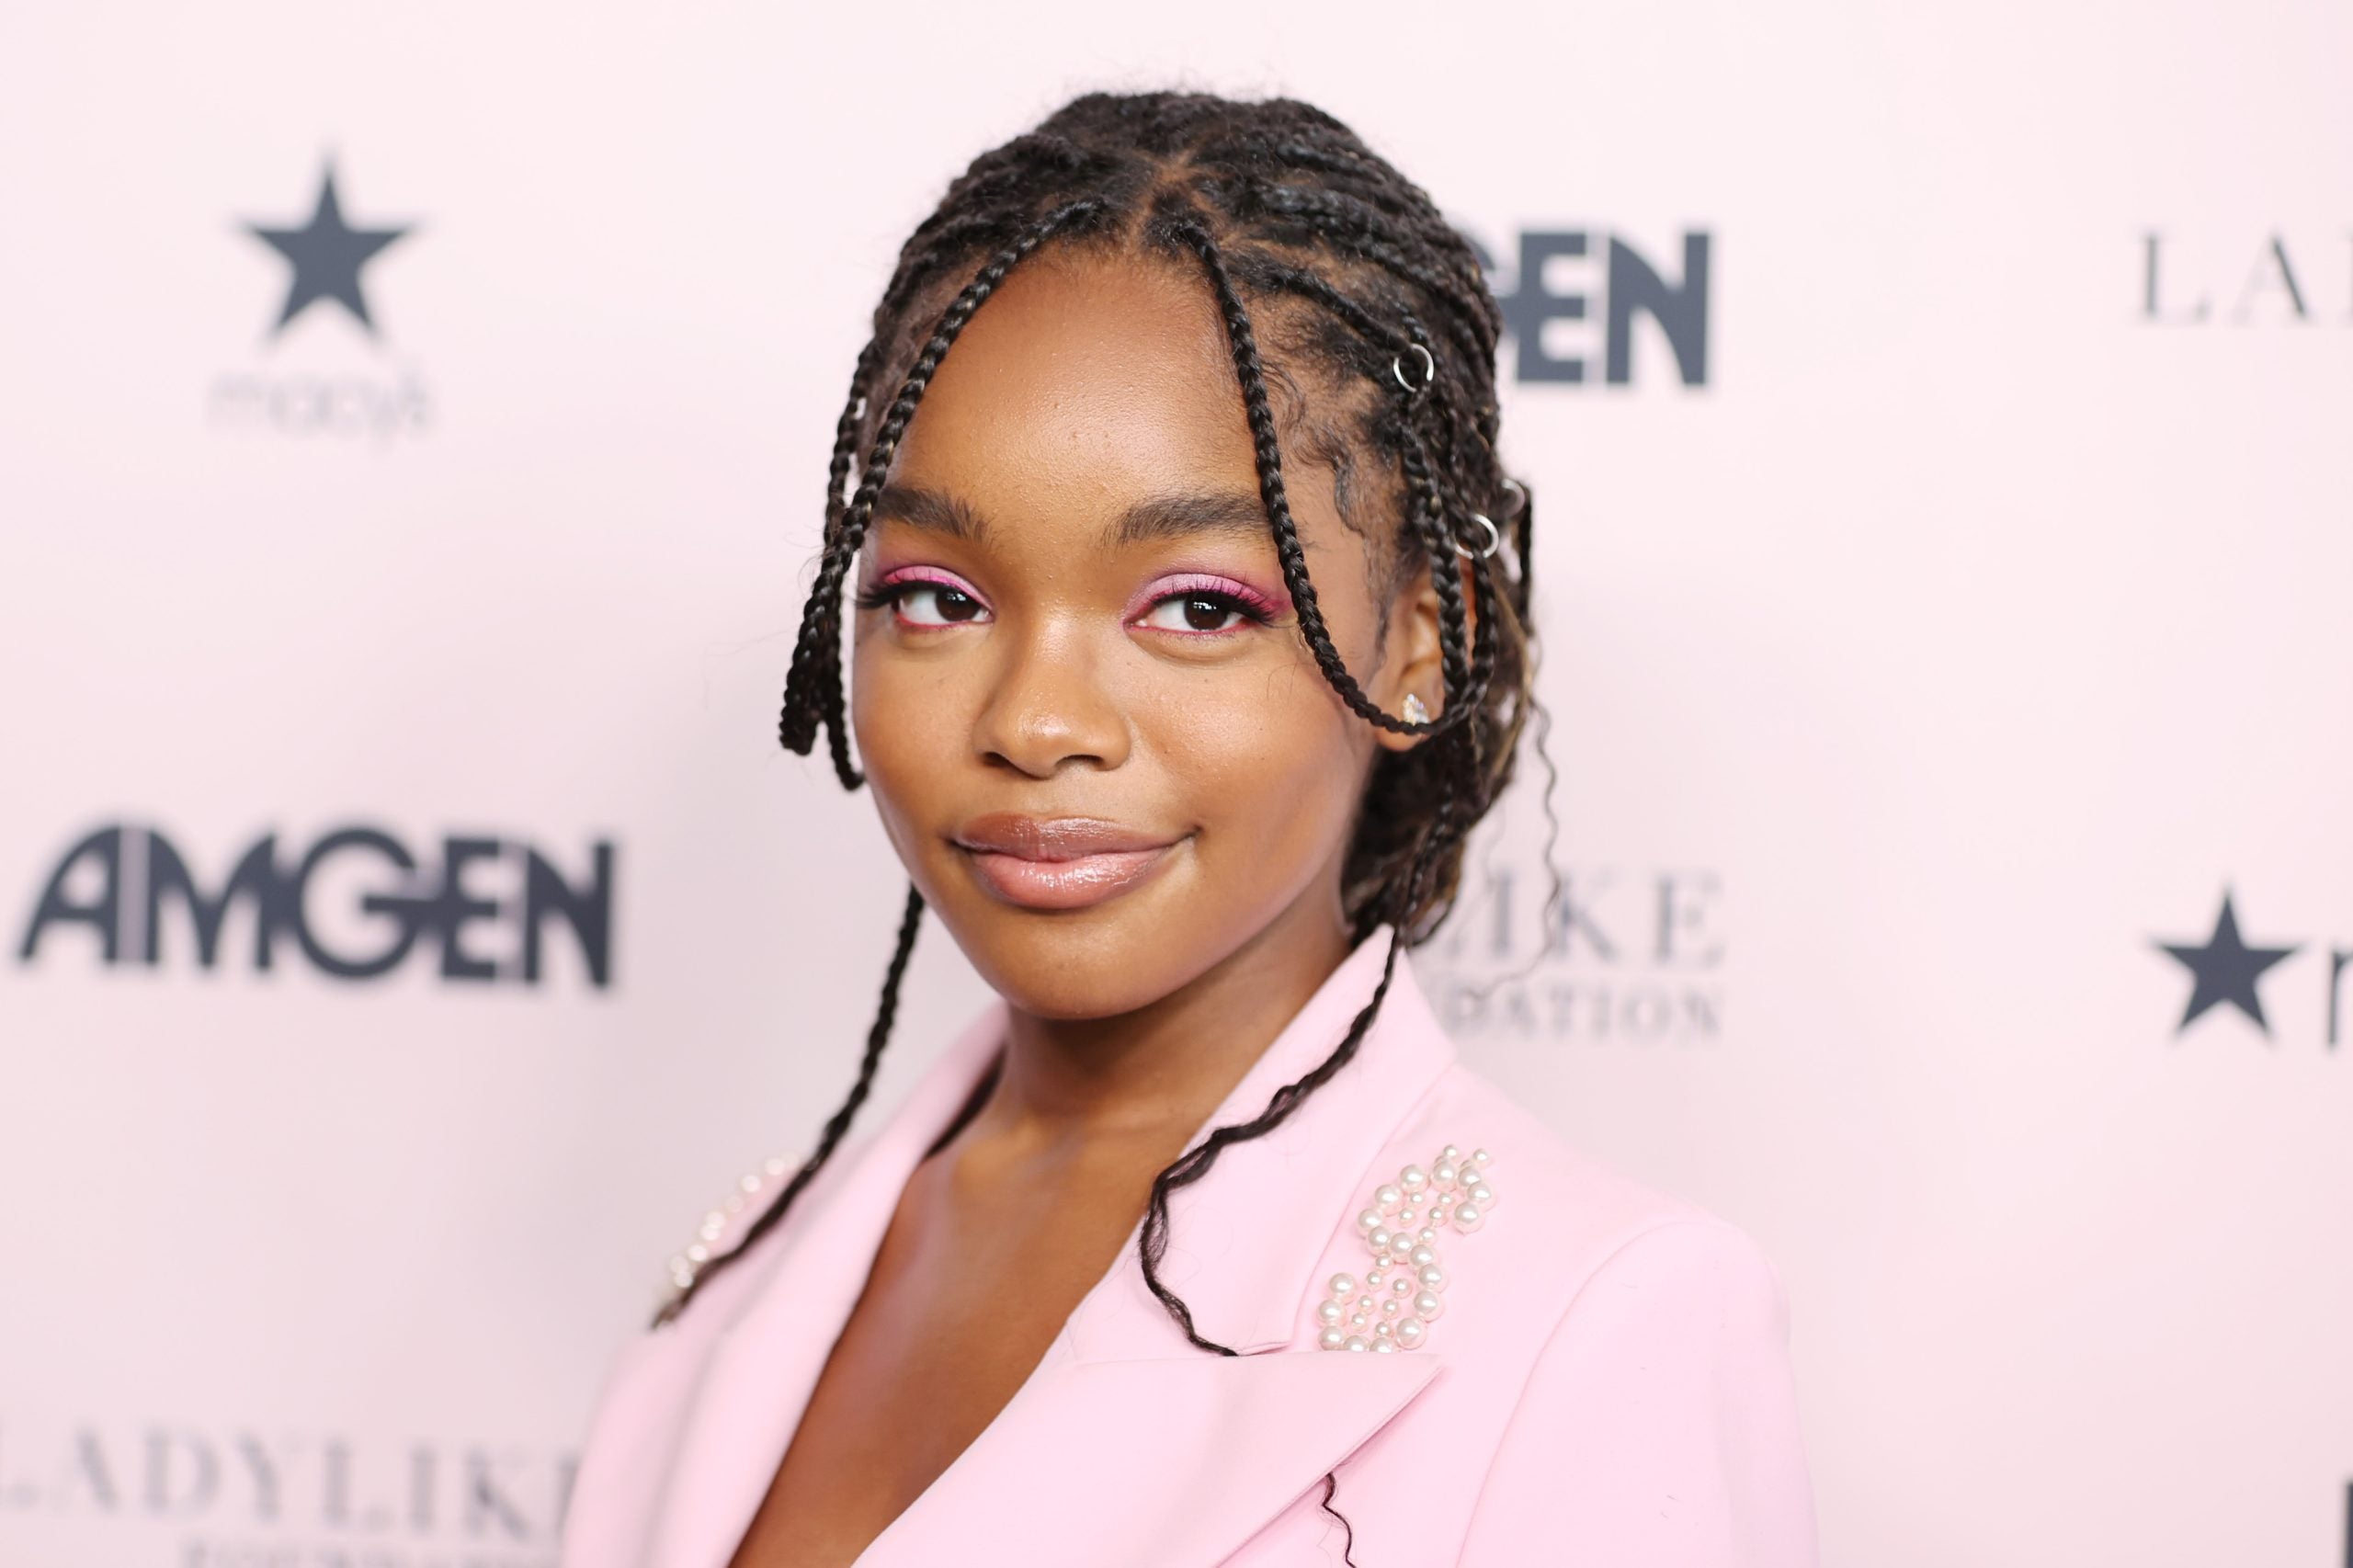 Marsai Martin On Keeping Her 'Circle Tight' In Hollywood, That 'No Black Pain' Rule And Combating Gen Z Loneliness